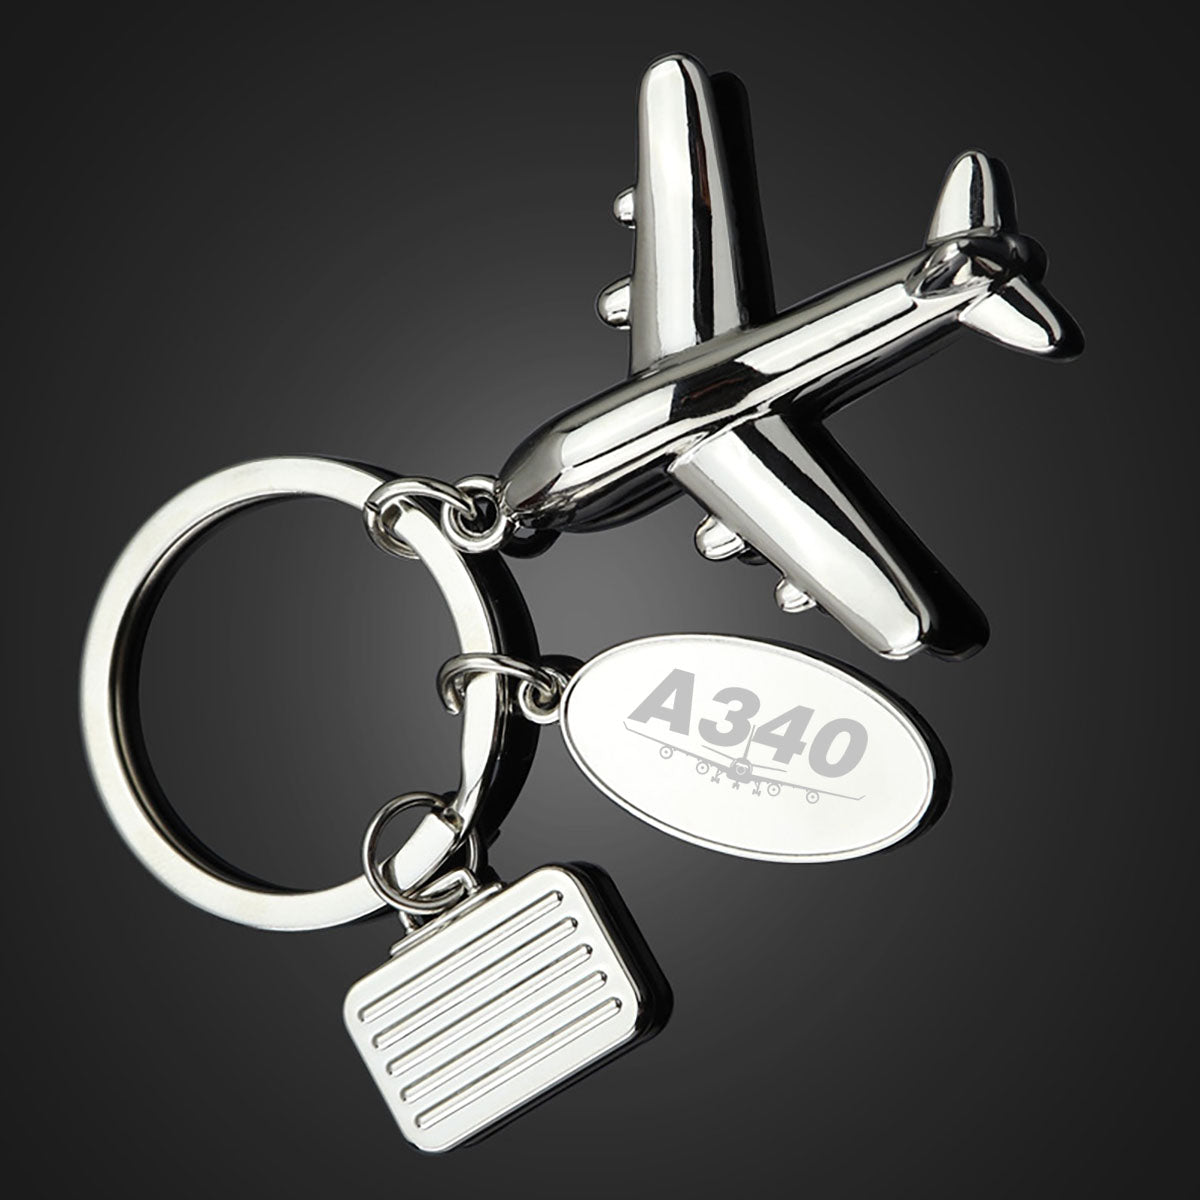 Super Airbus A340 Designed Suitcase Airplane Key Chains